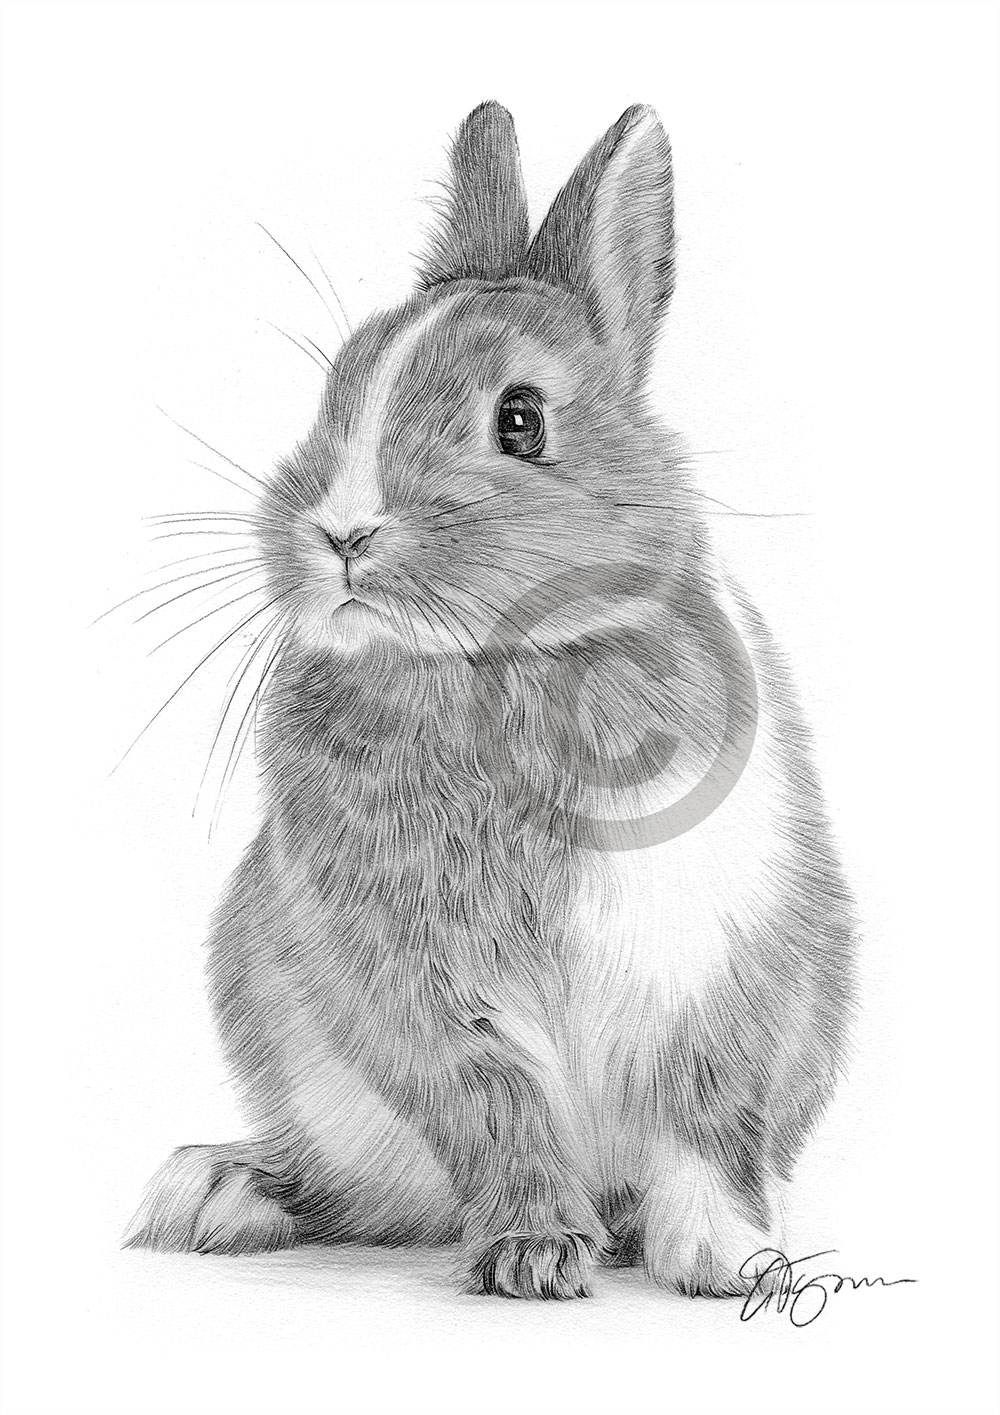 Pencil drawing of a bunny rabbit by artist Gary Tymon